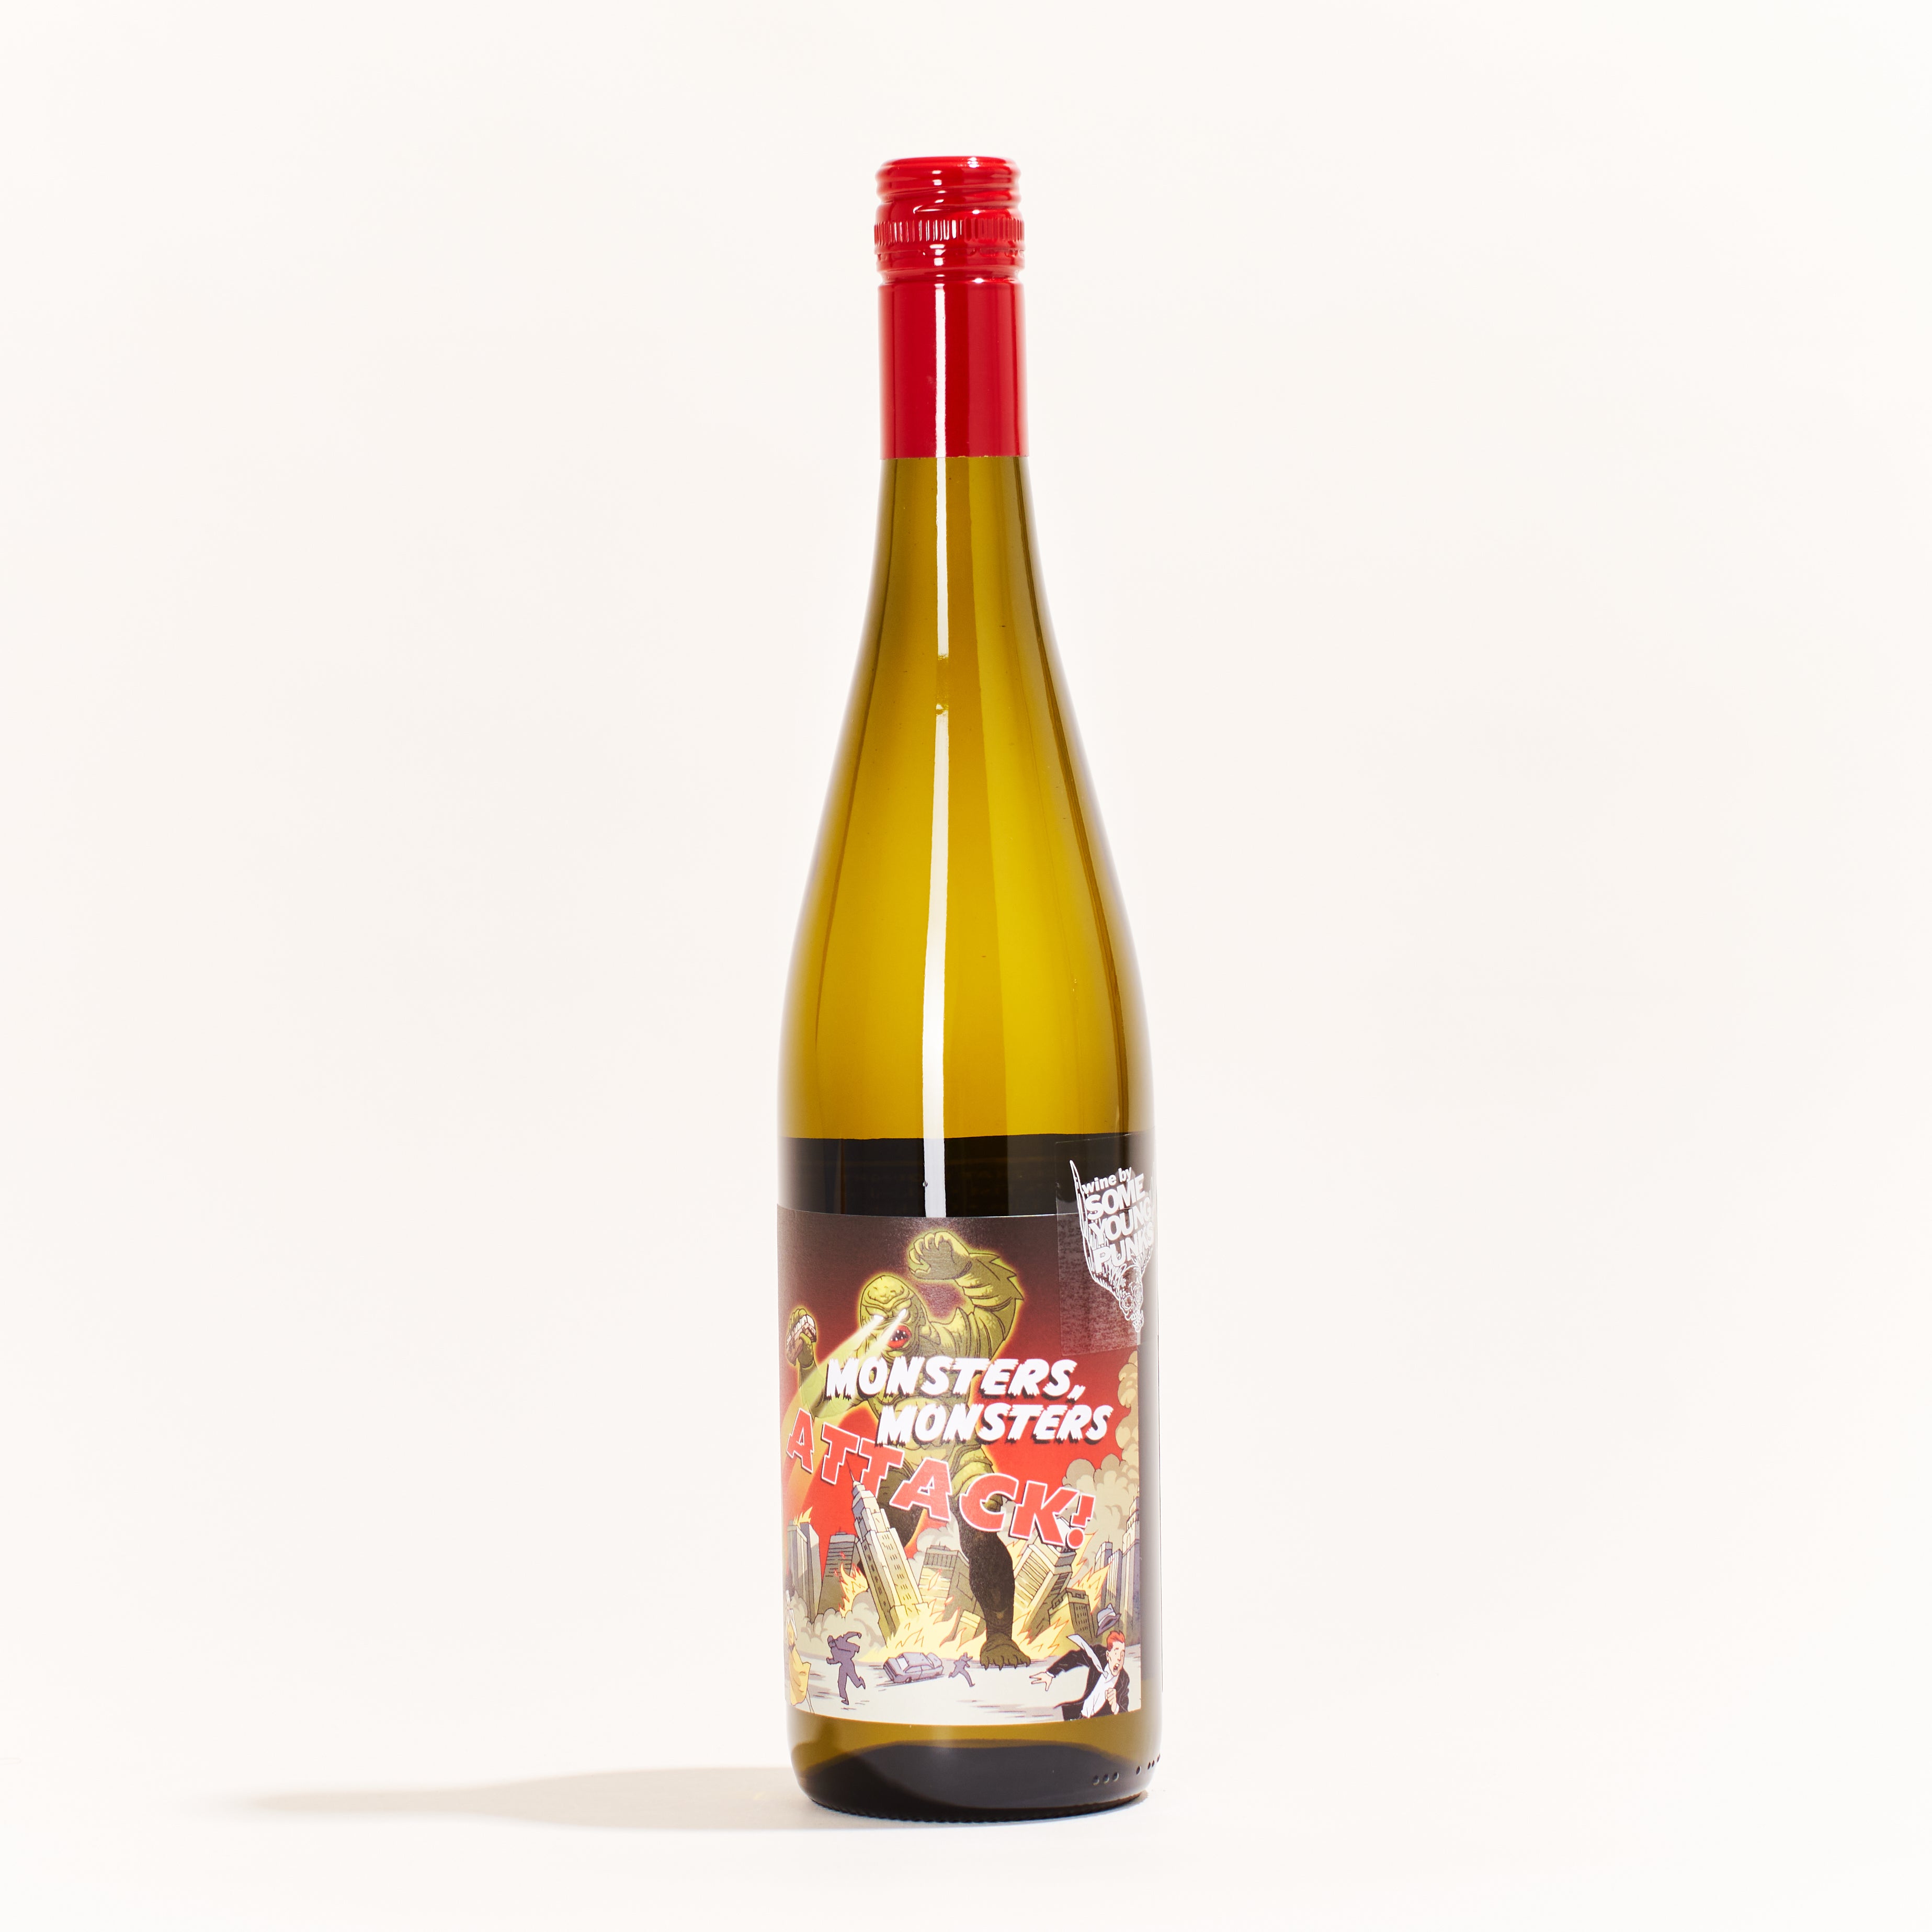 Some Young Punks Monsters Monsters Attack Riesling natural white wine Clare Valley Australia